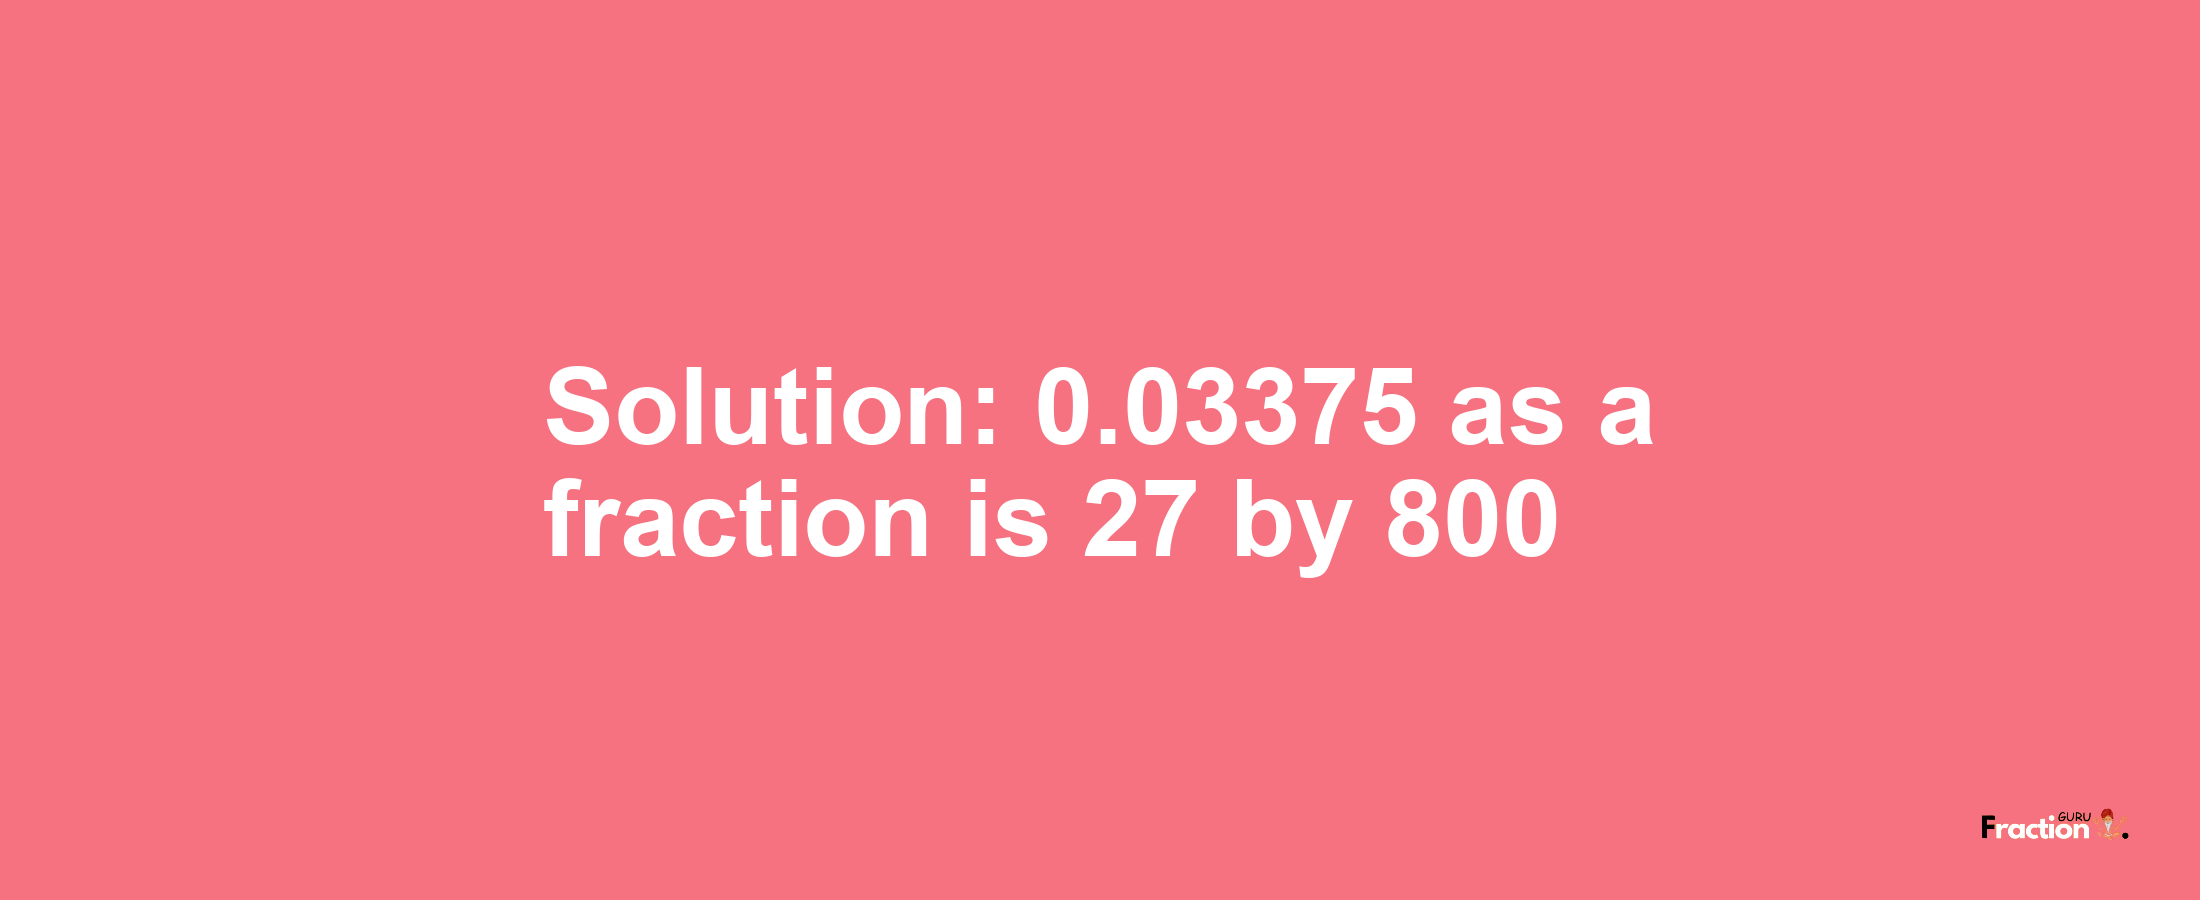 Solution:0.03375 as a fraction is 27/800